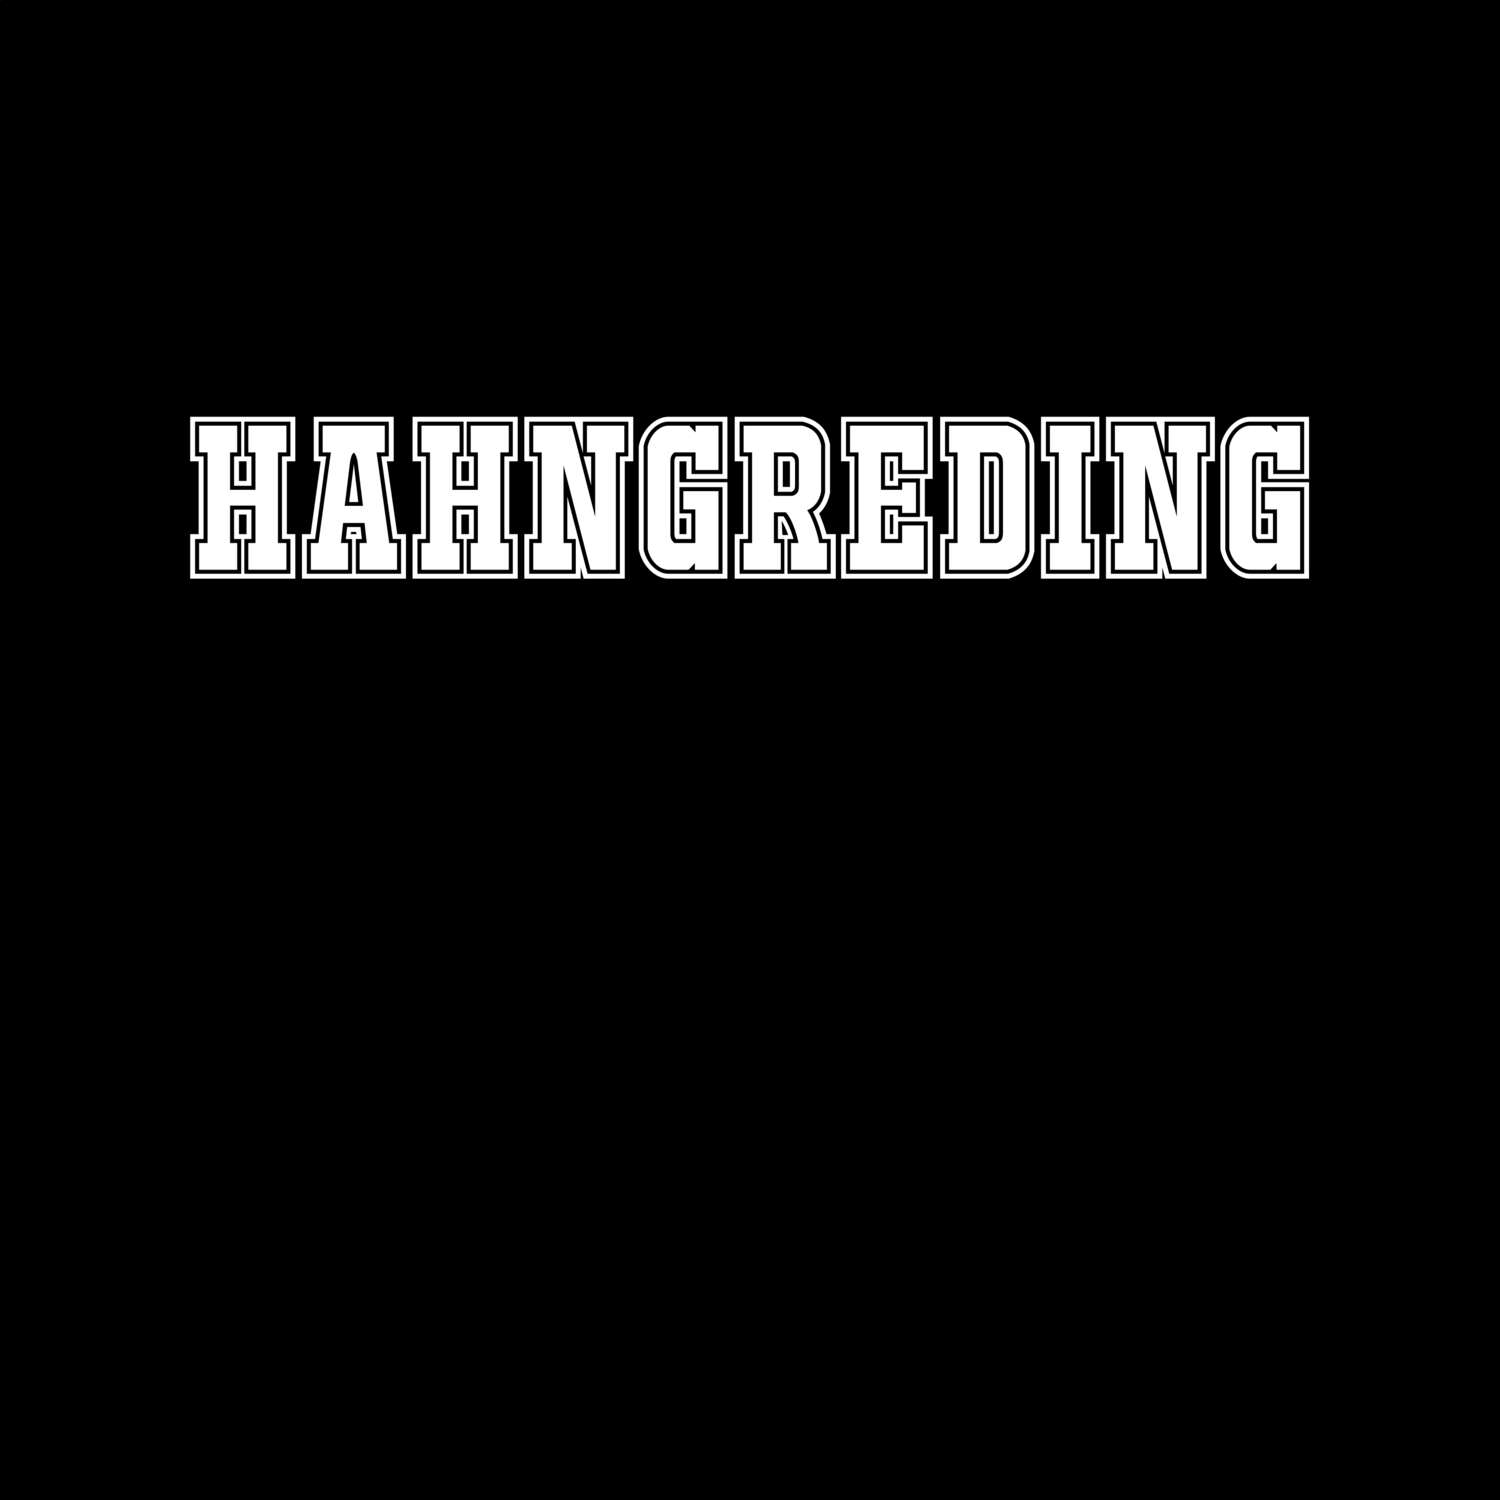 Hahngreding T-Shirt »Classic«